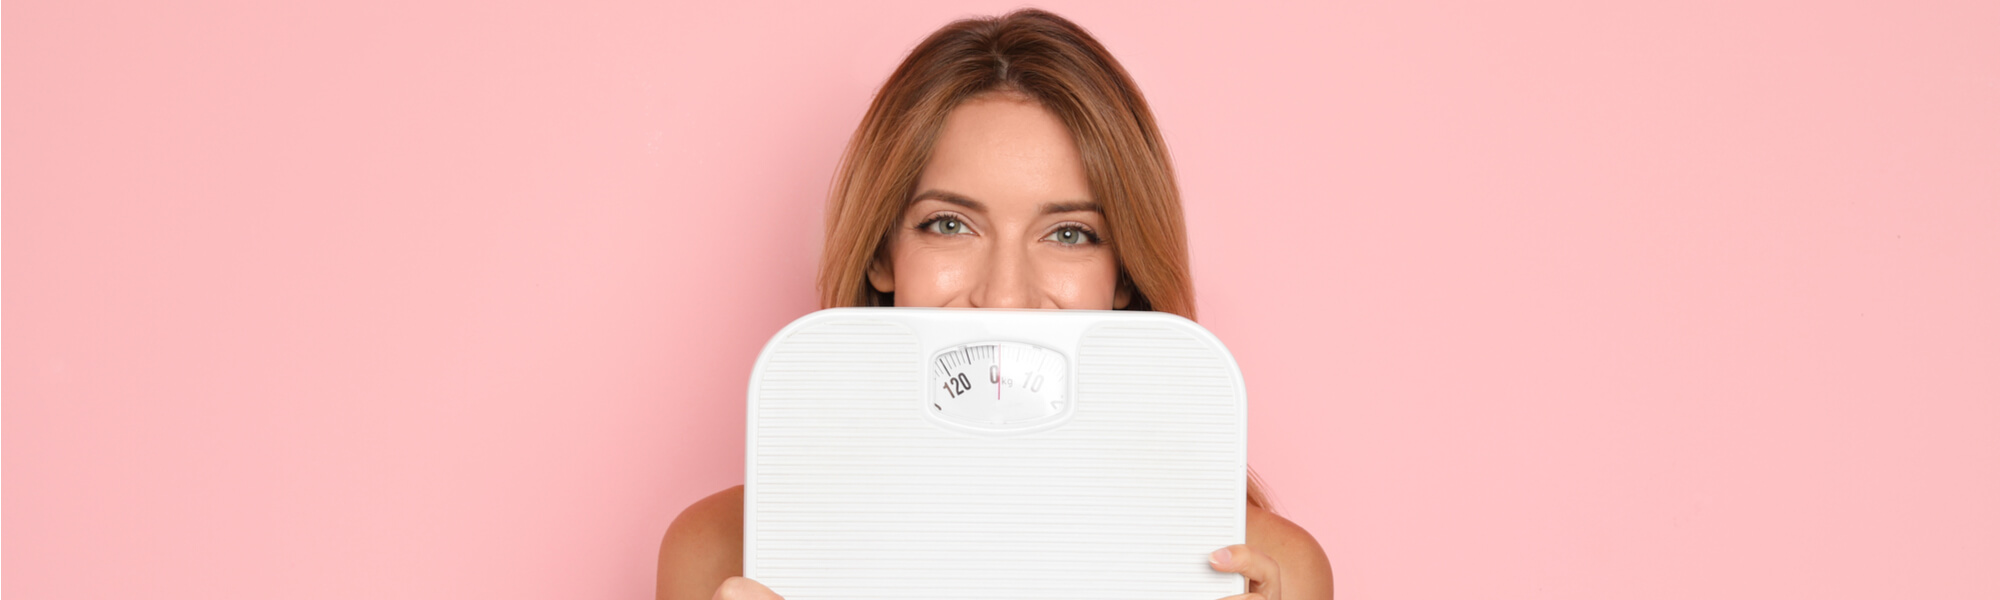 How Much Weight Can You Lose in a Week? A Dietitian Explains